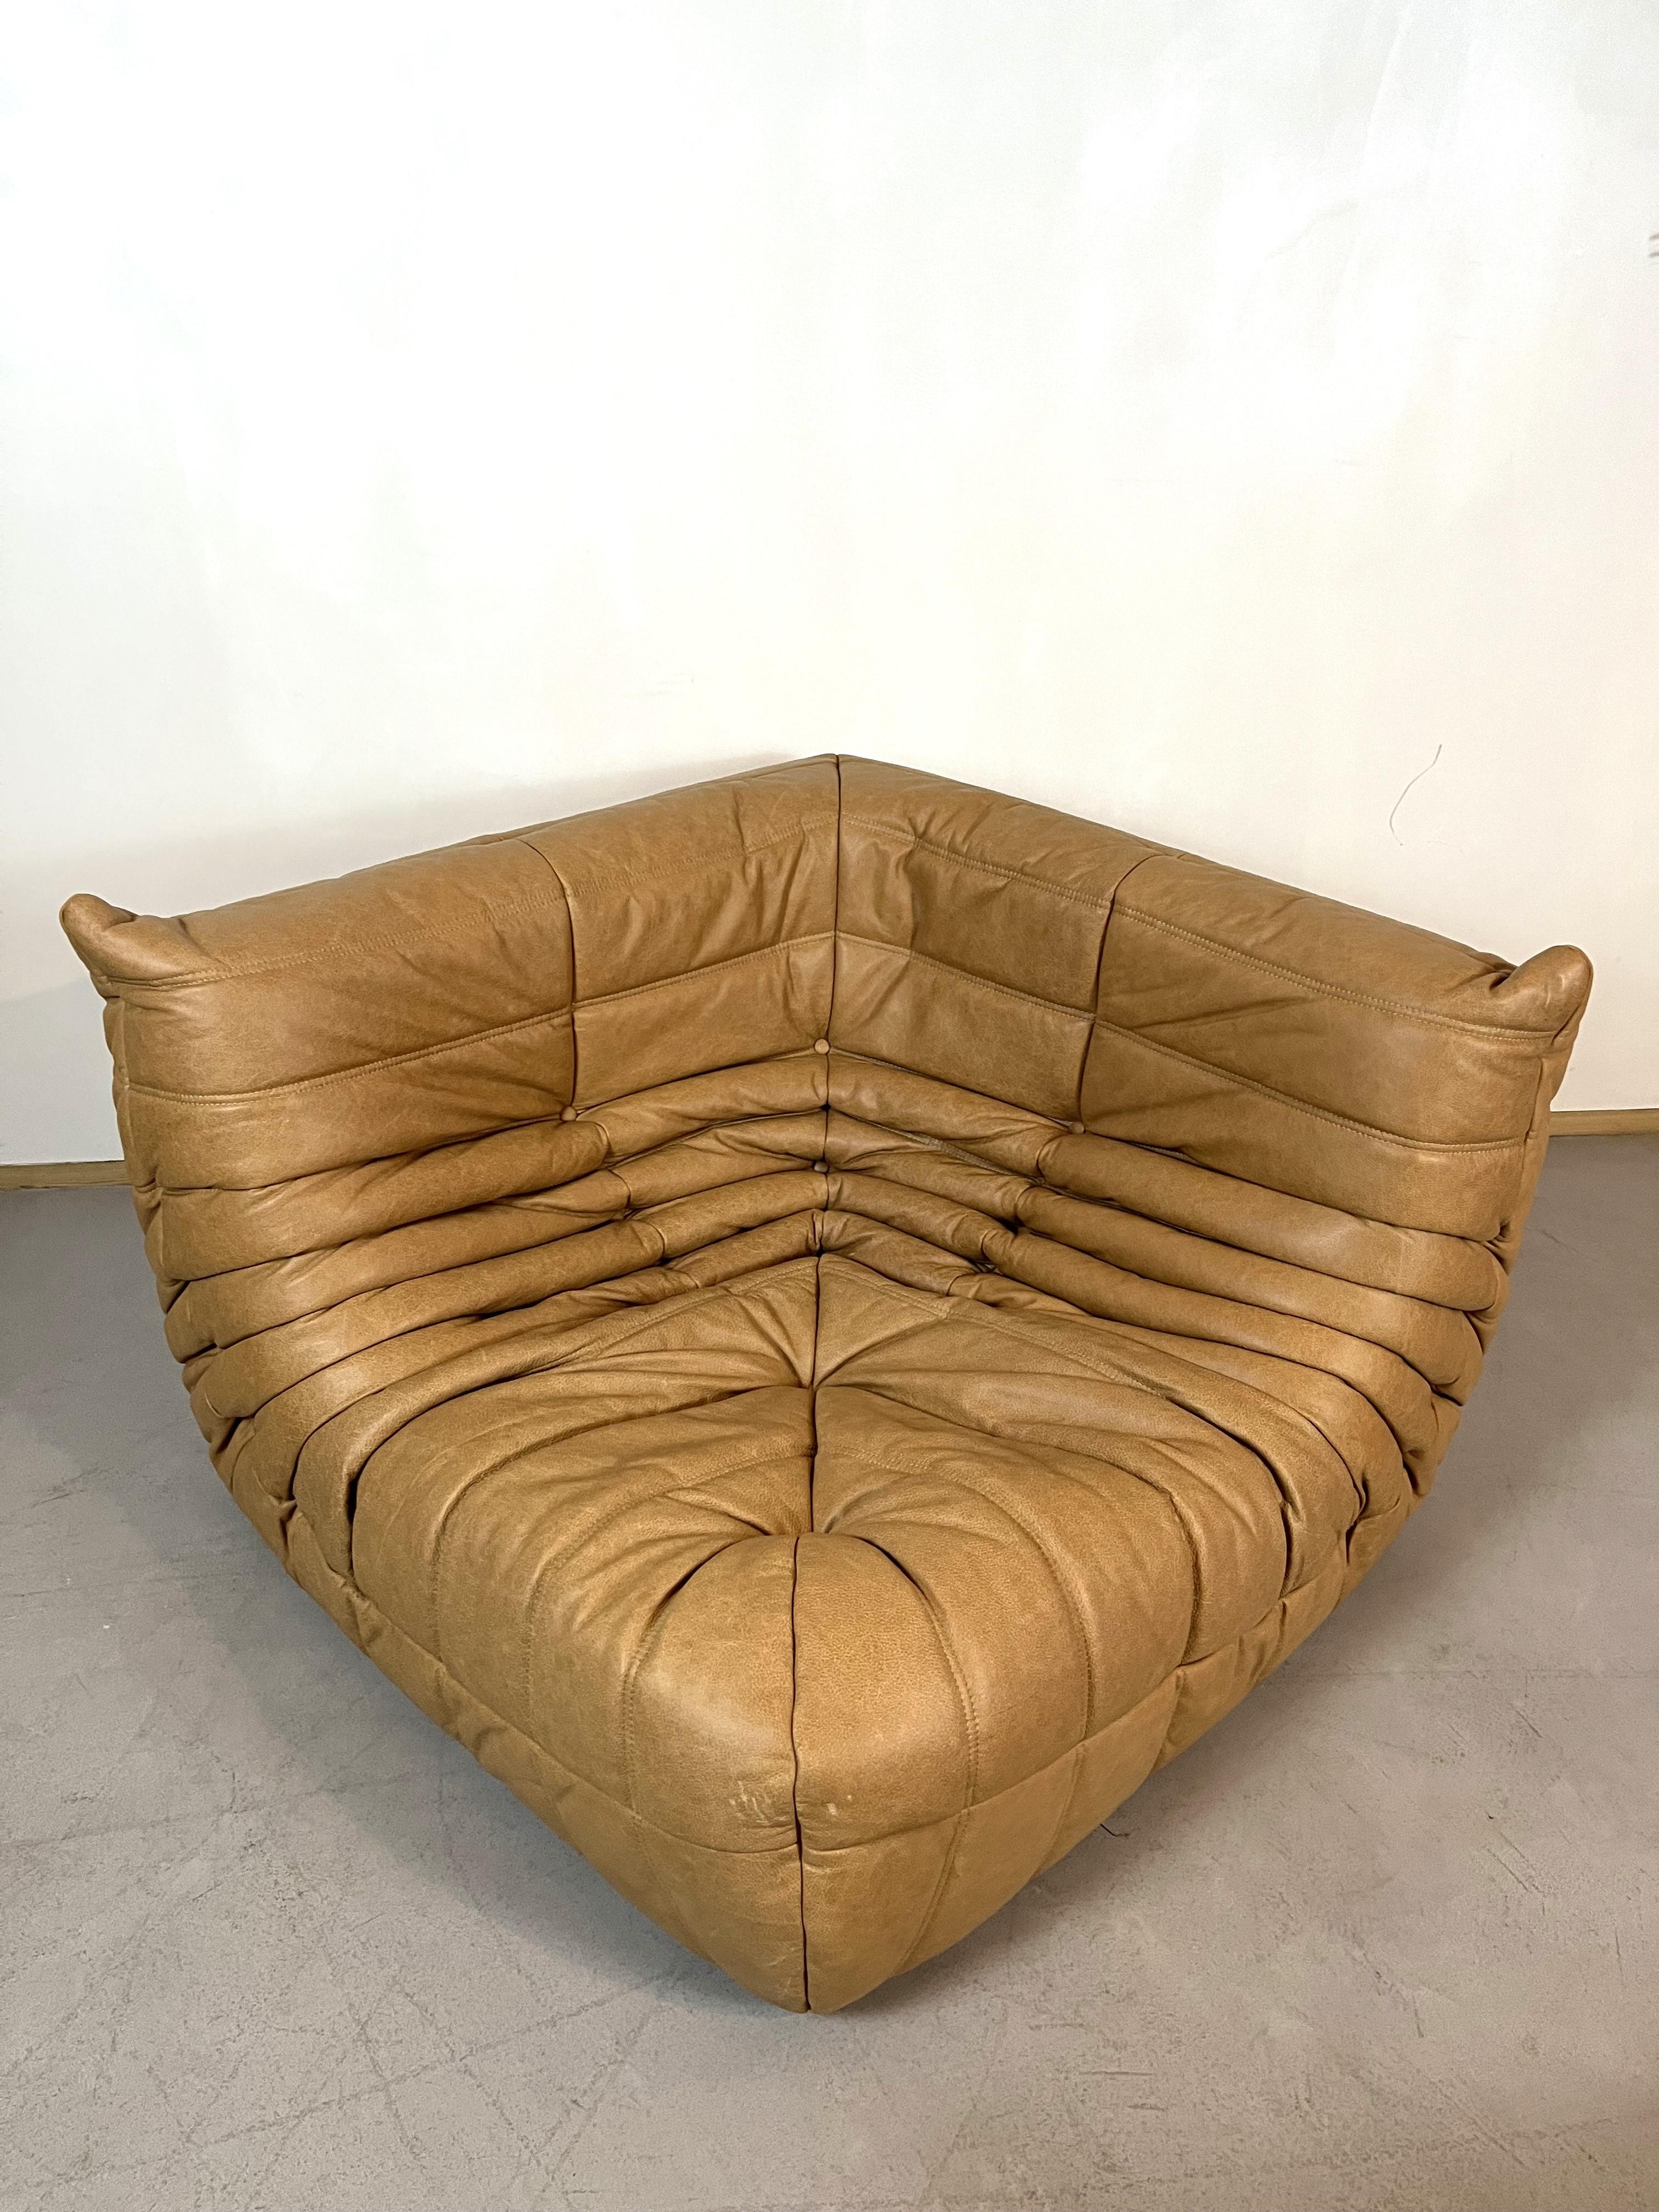 Contemporary Camel leather Togo Sofa by Michel Ducaroy for Ligne Roset, Set of 5 pieces For Sale